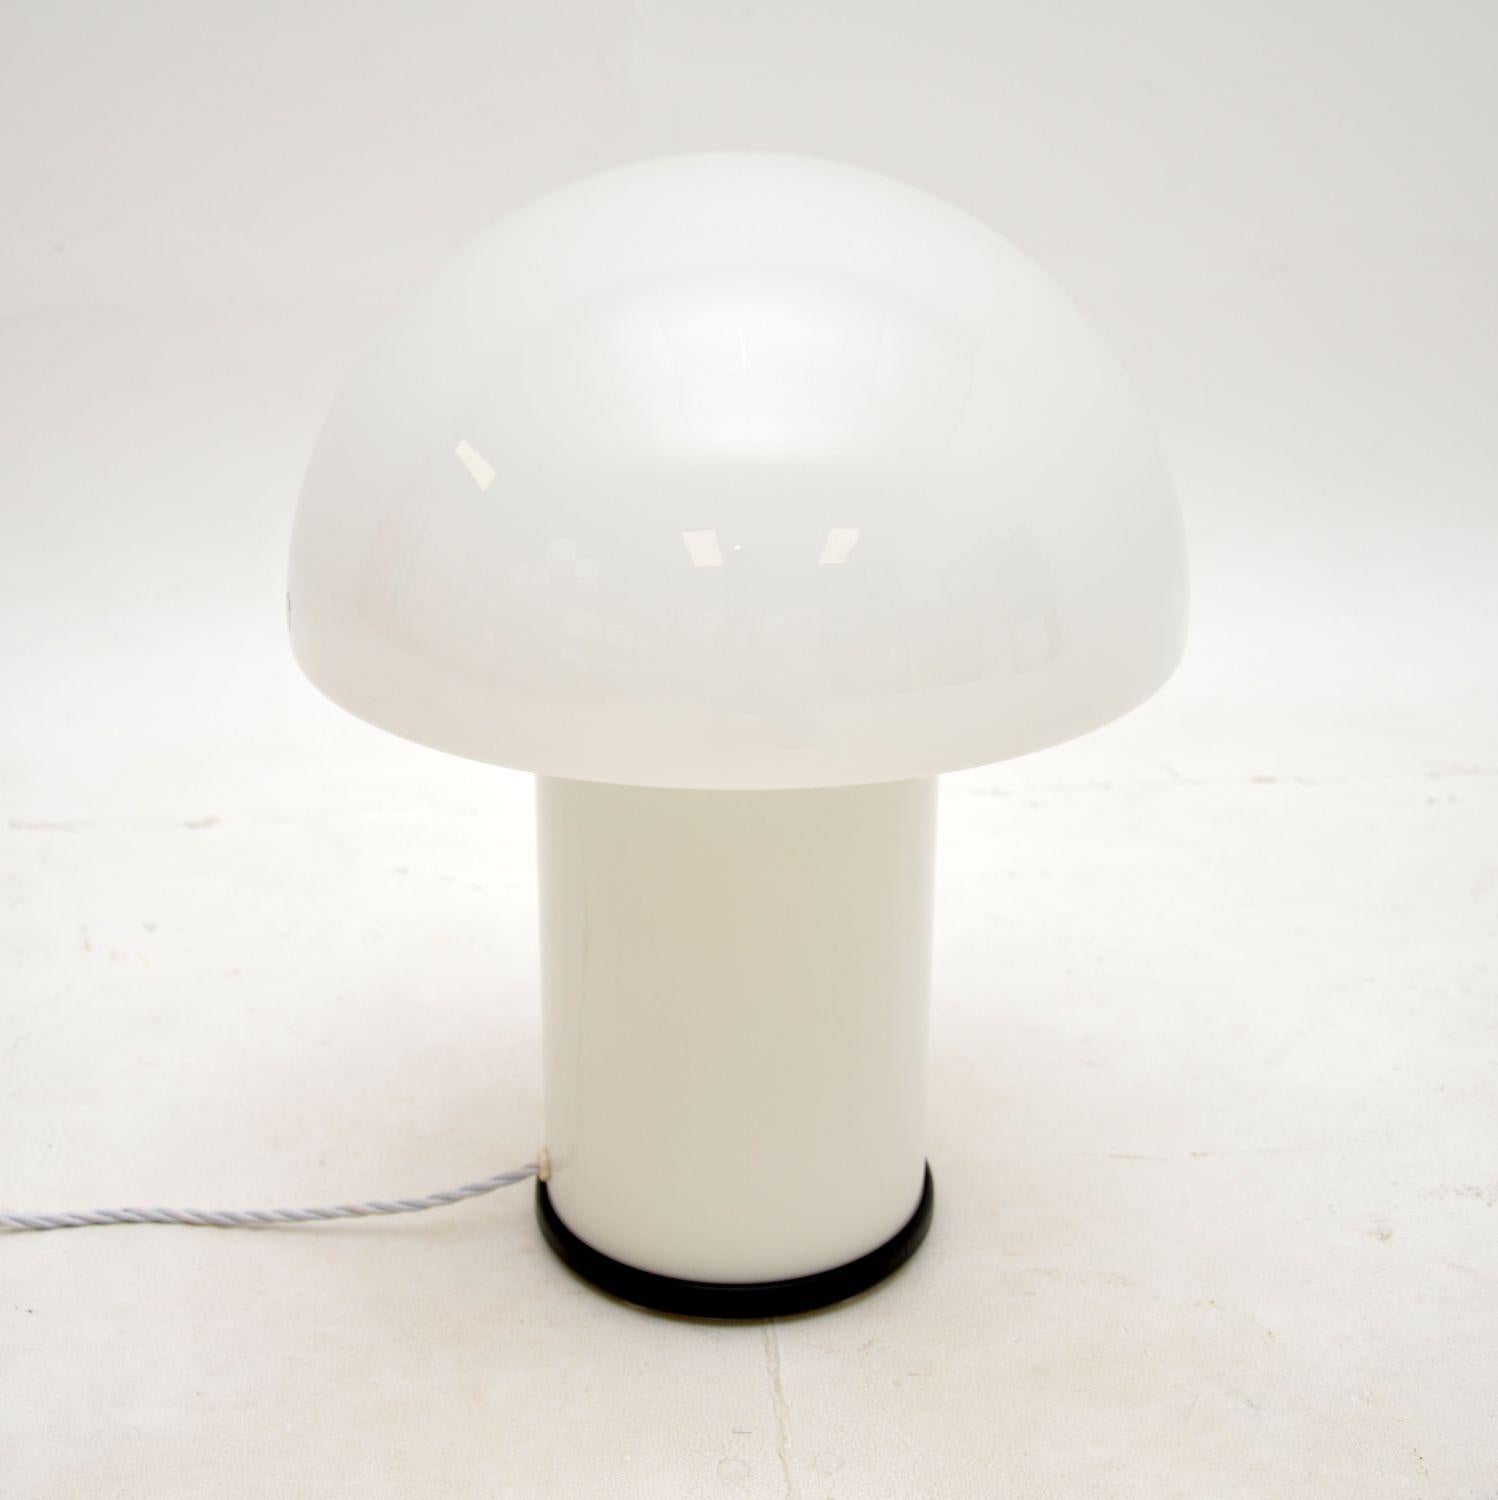 A stylish and very well made vintage glass mushroom lamp by Peil and Putzler. This is hand blown Italian Murano glass, imported to Germany and made by Peil and Putzler in the 1970’s.

The quality is outstanding, this is an impressive and useful